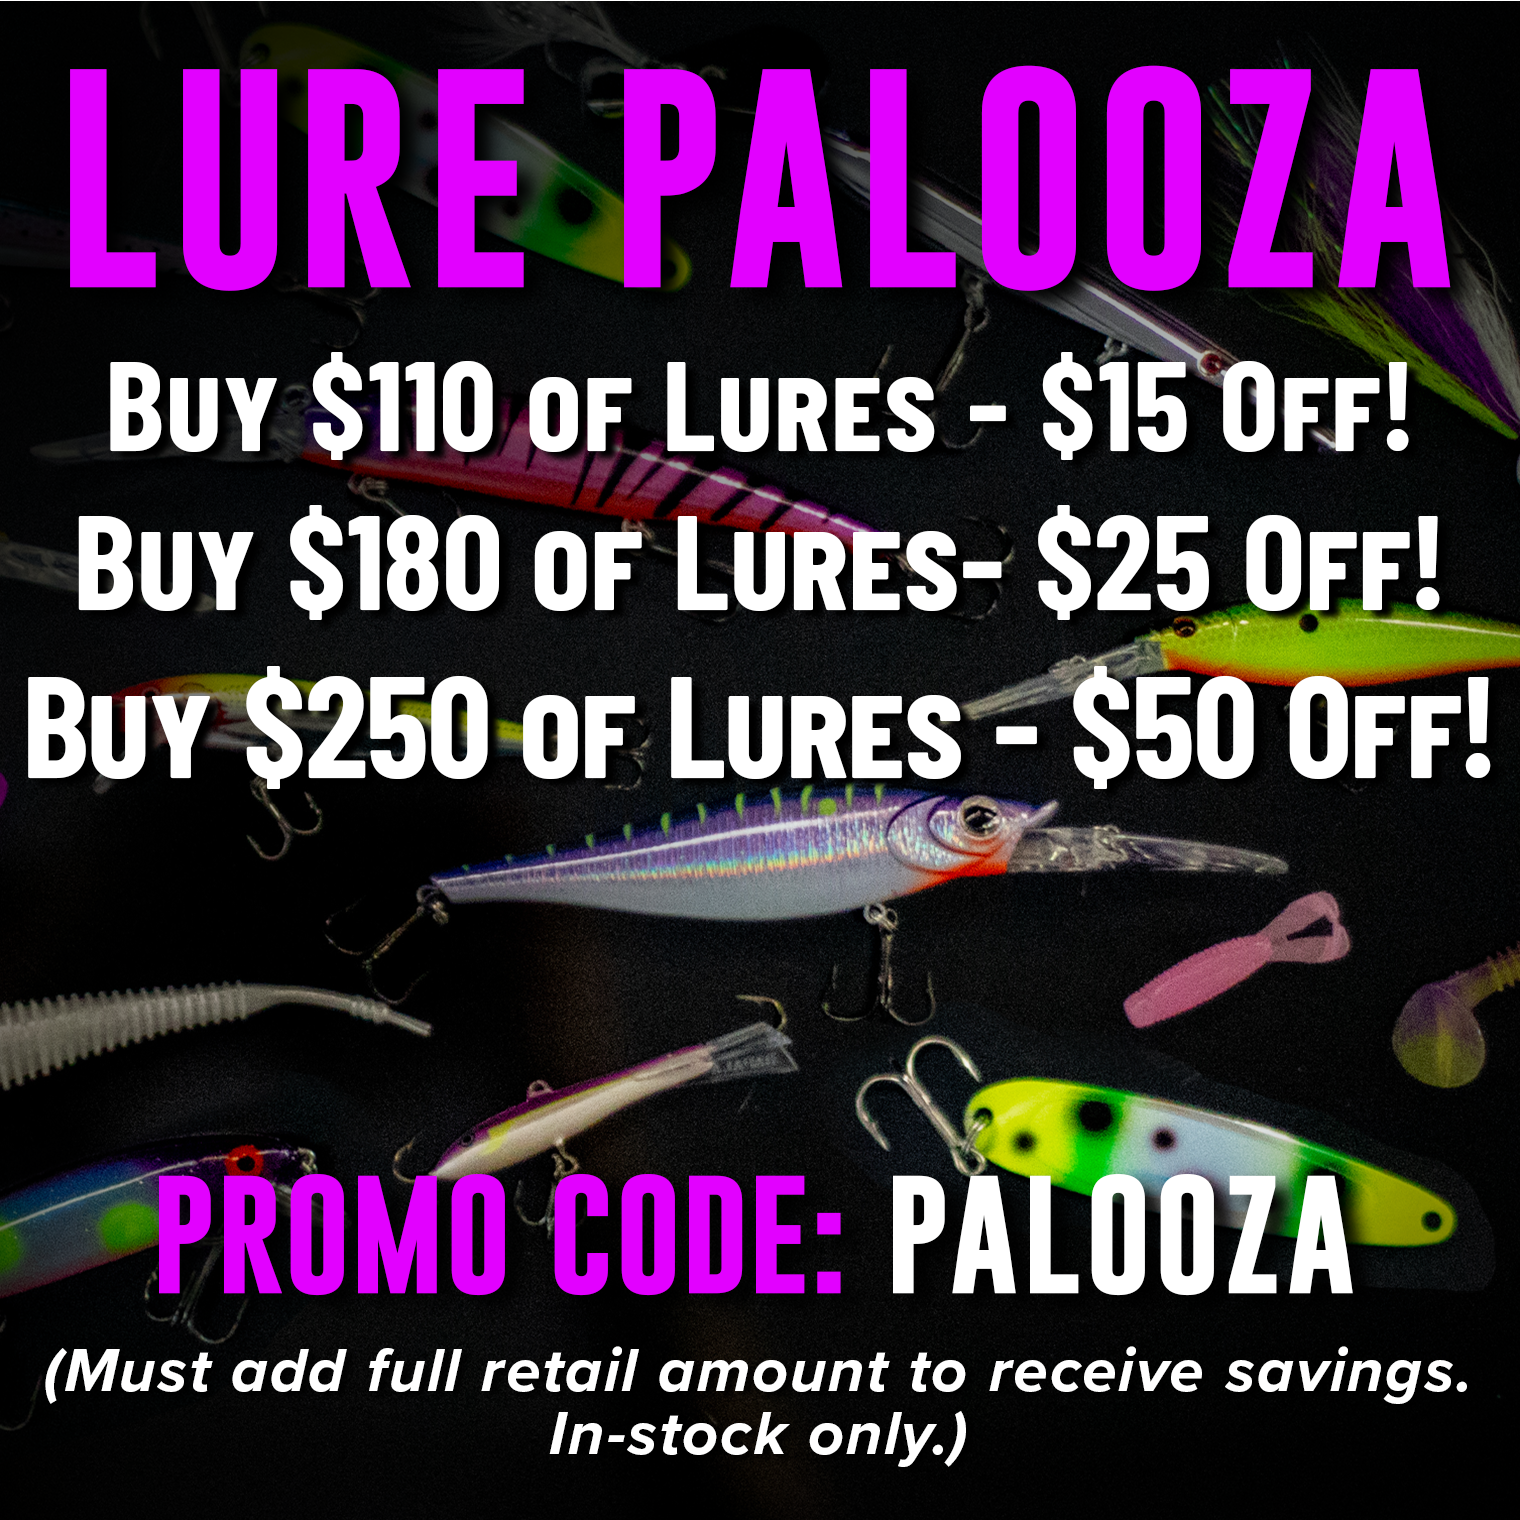 Lure Palooza! Buy $110 of Lures - $15 Off! Buy $180 of Lures - $25 Off! Buy $250 Of Lures - $50 Off! Promo Code: PALOOZA (Must add full retail amount to receive savings. In-stock only.)